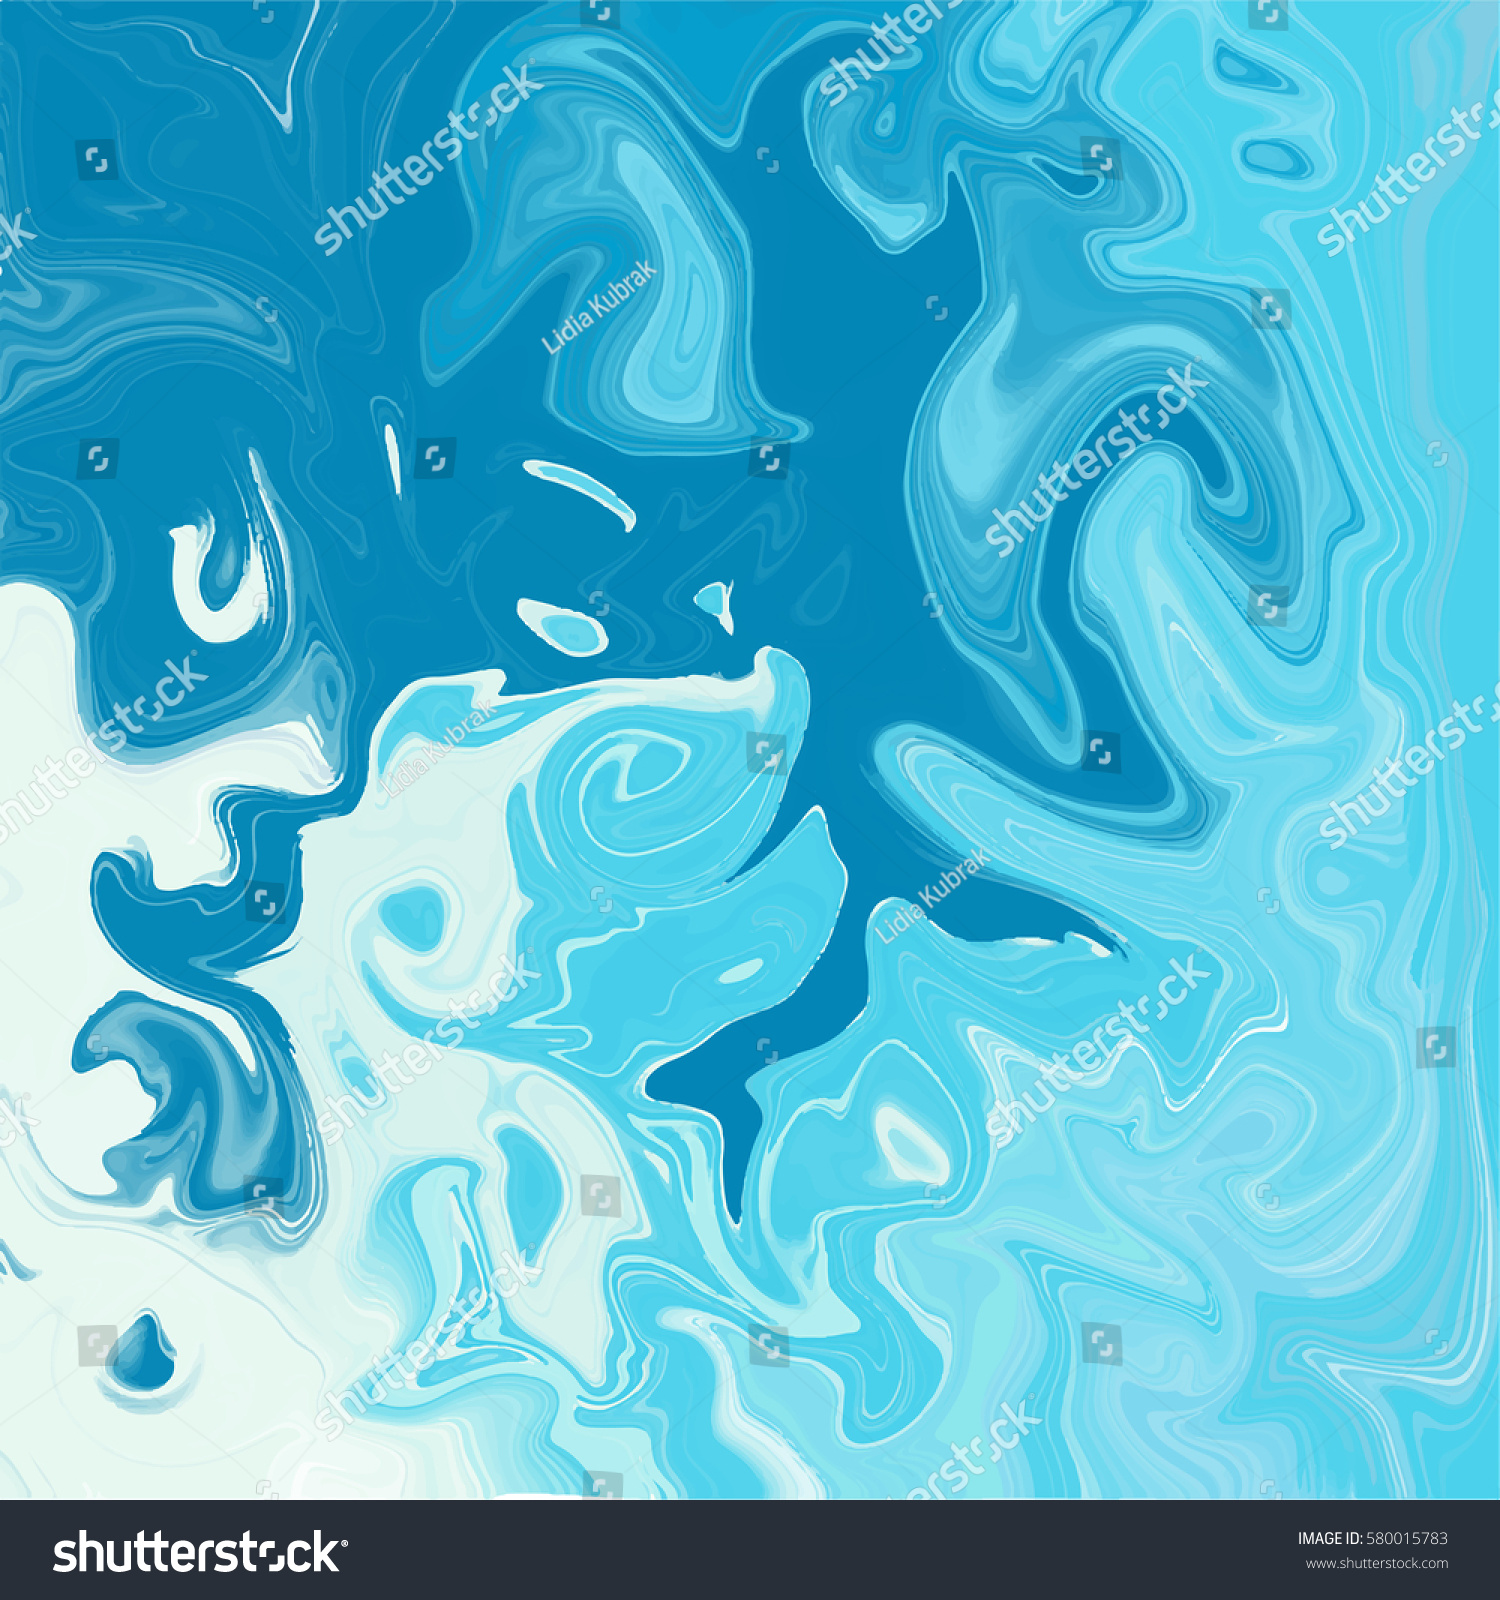 Abstract Marbled Ink Background Hand Drawn Stock Vector Royalty Free Shutterstock